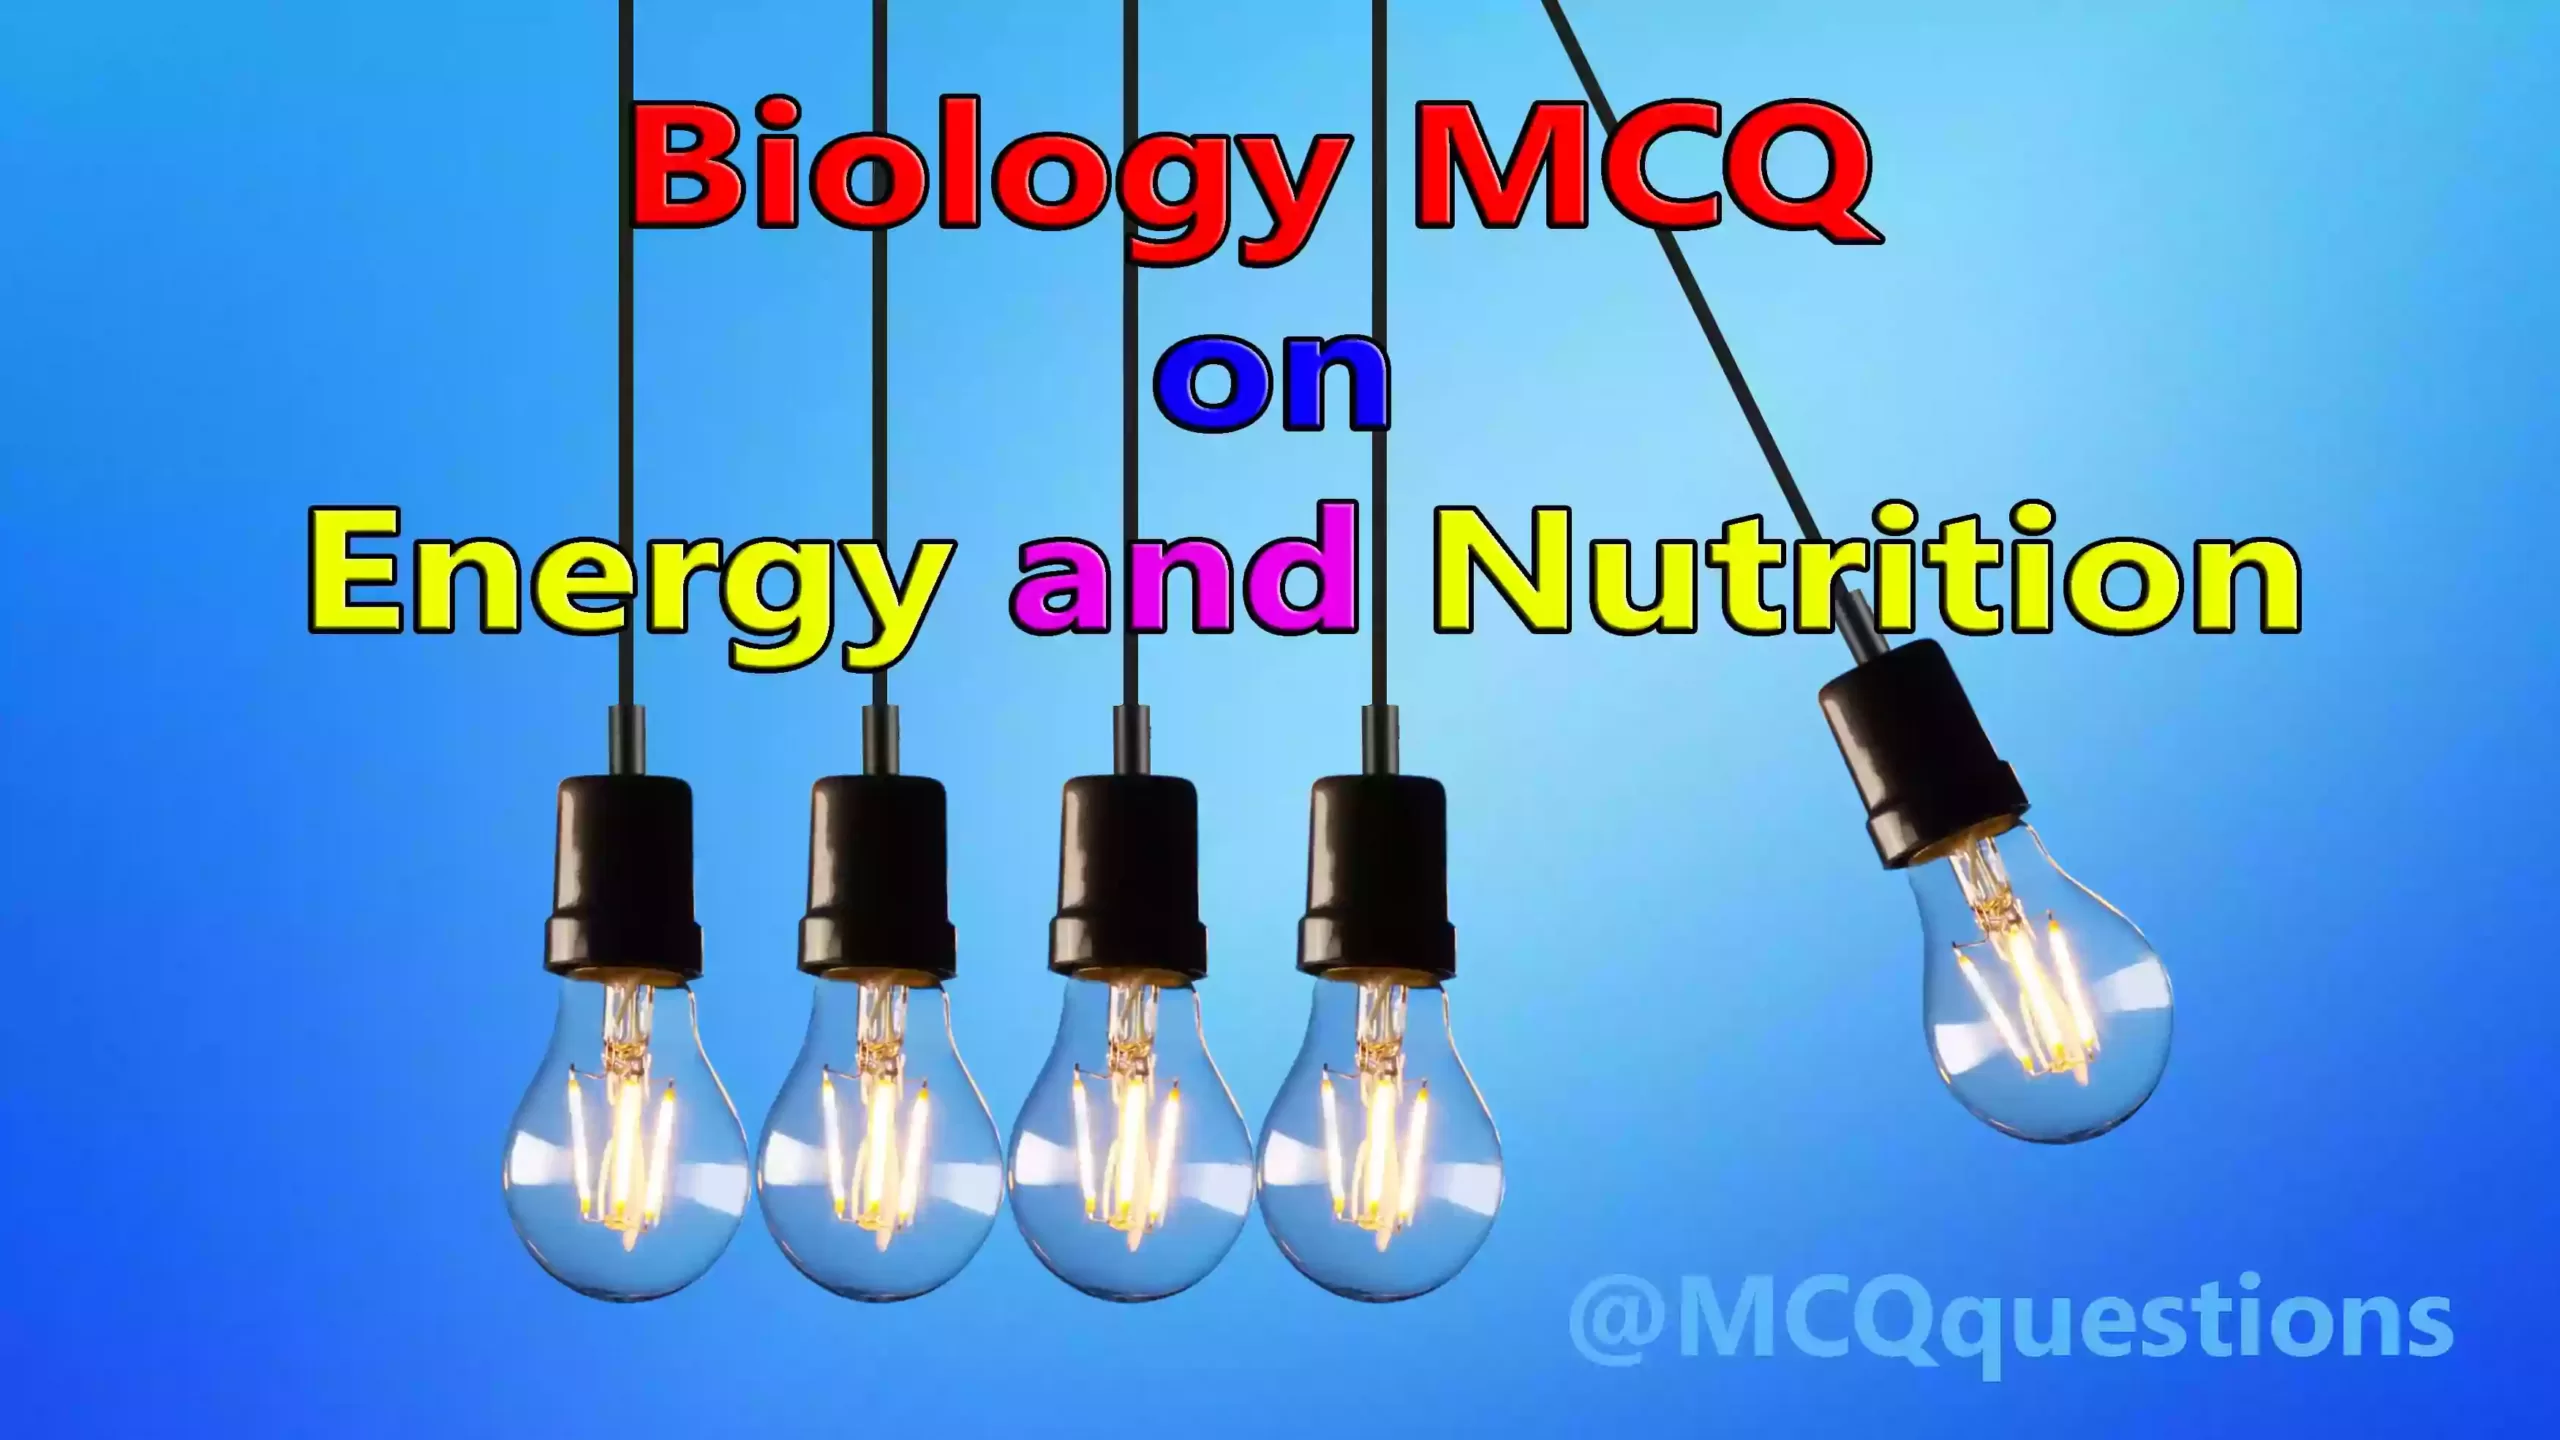 Biology MCQ on Energy and Nutrition